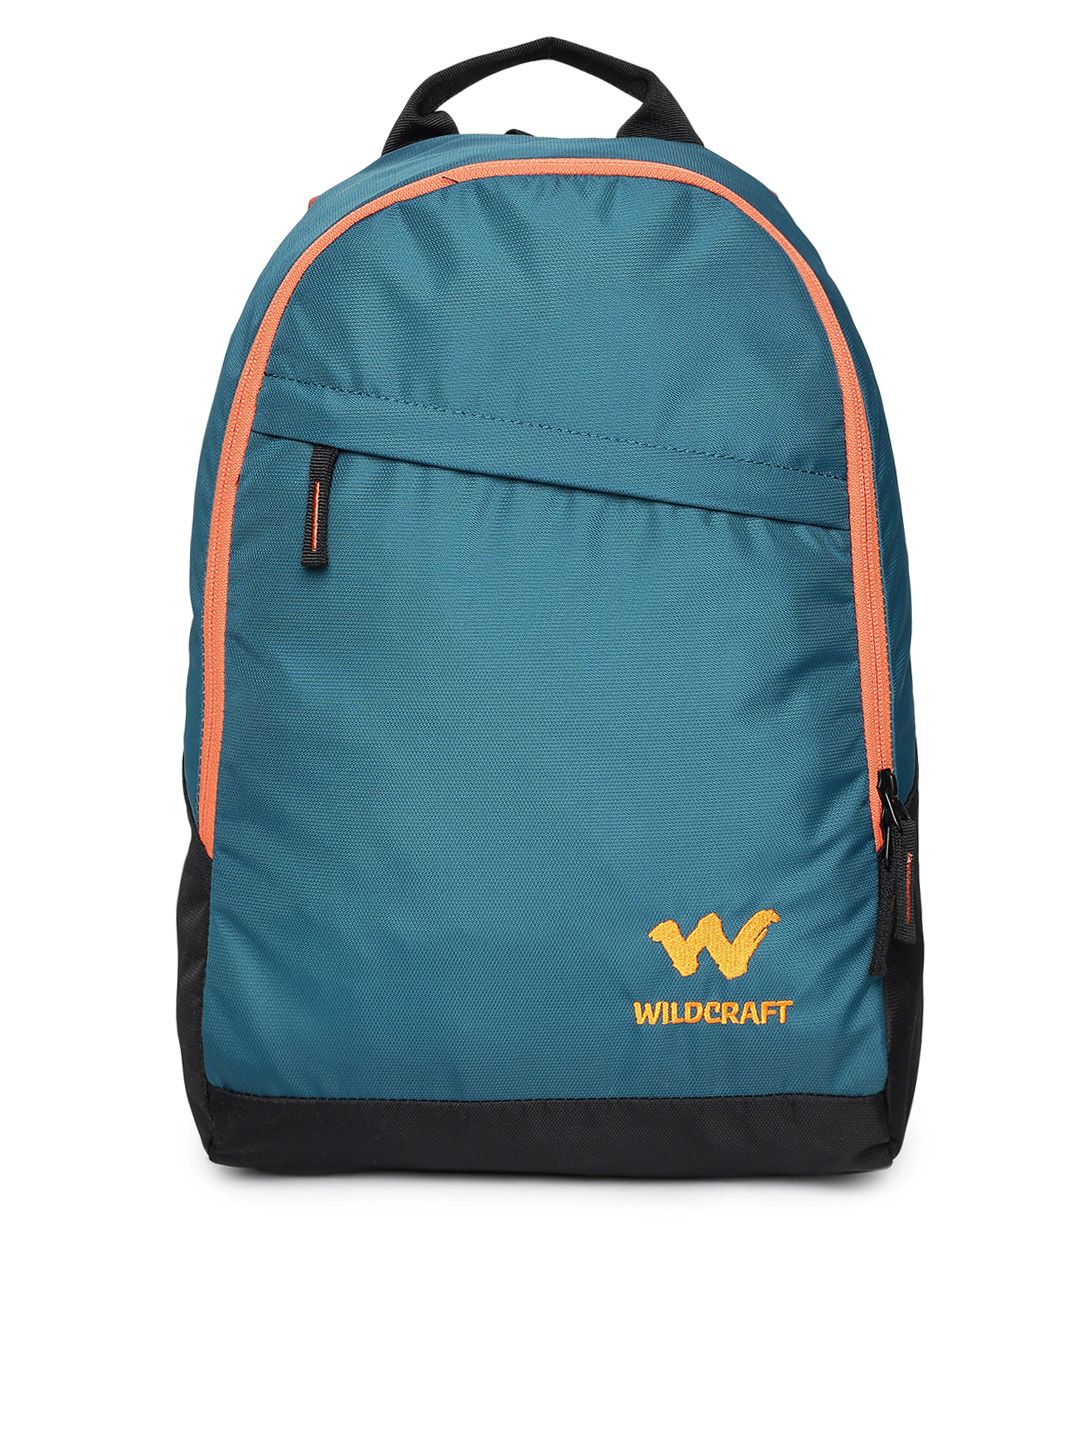 Wildcraft Unisex Teal Blue Brand Logo Backpack Price in India